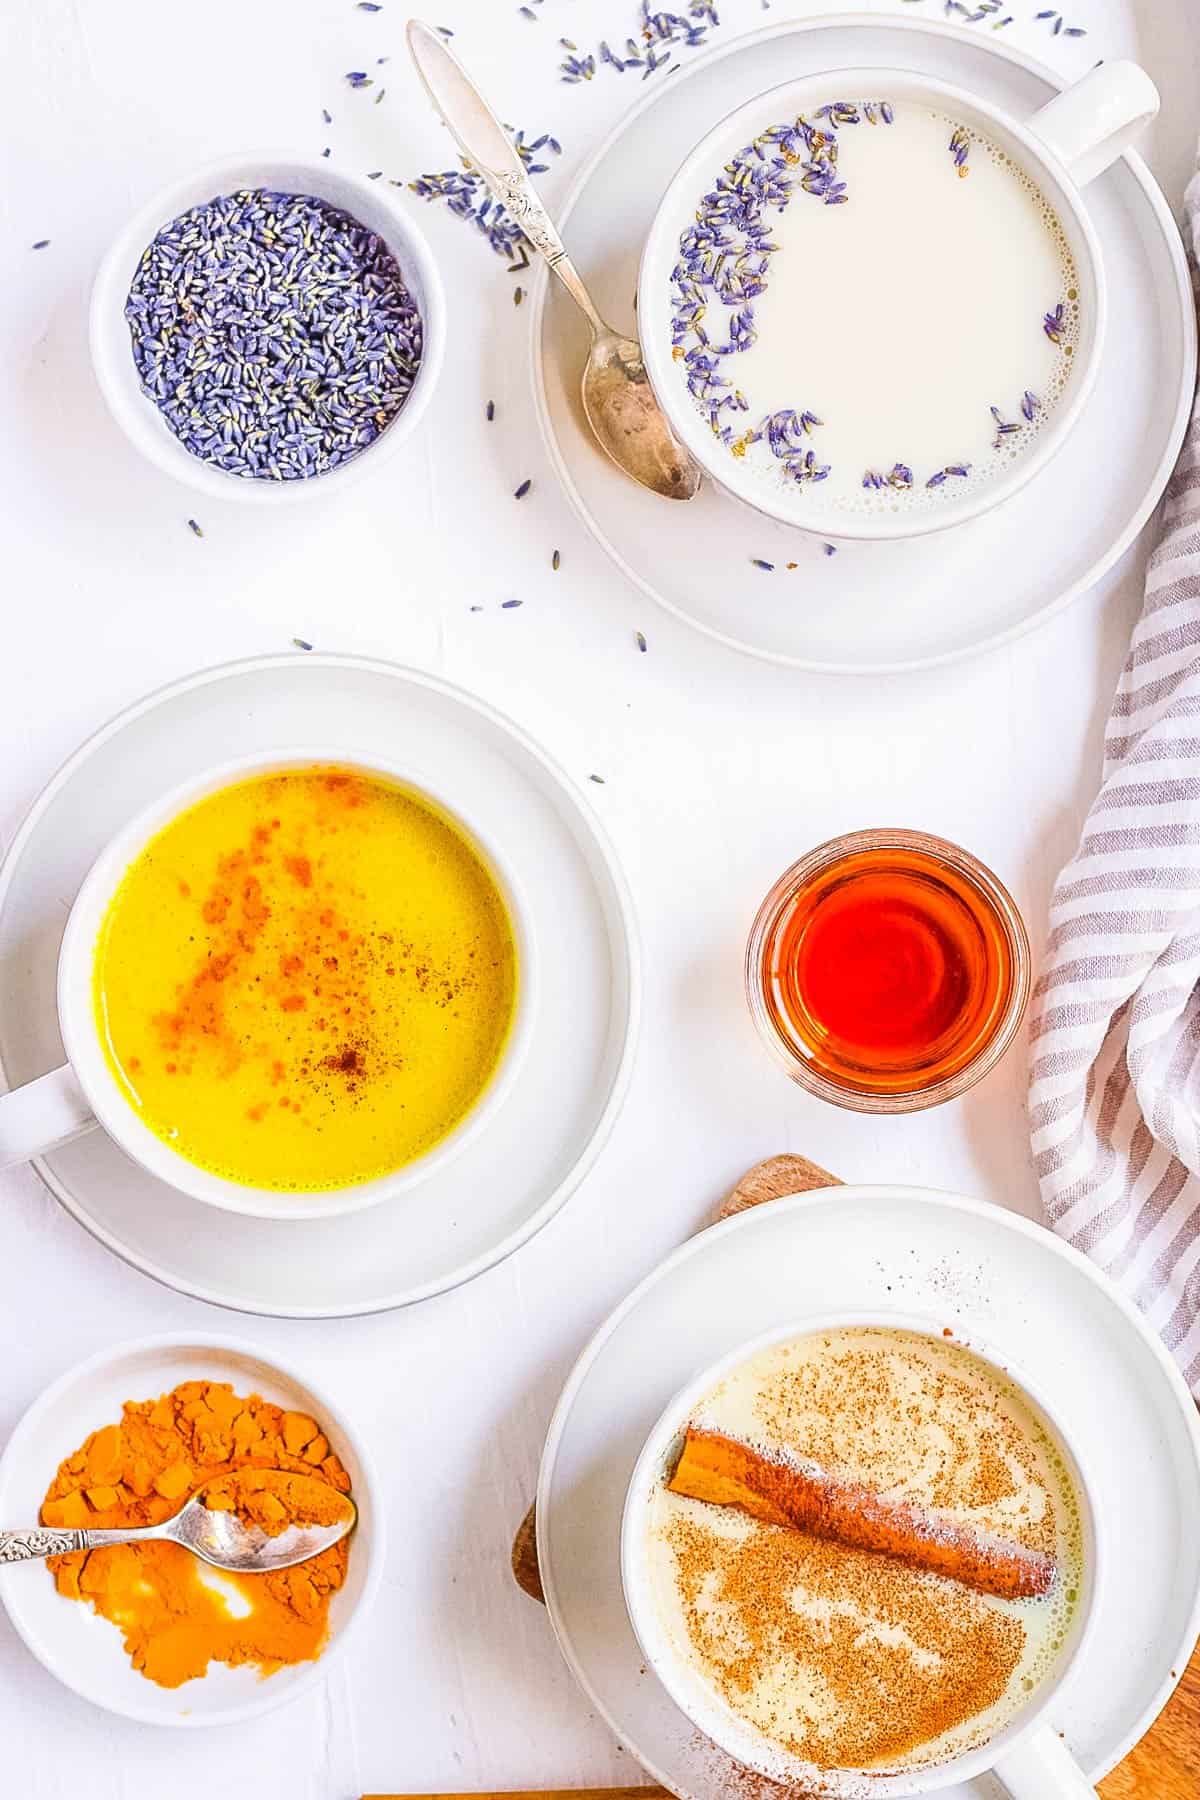 Moon milk s،wn 4 ways: traditional, lavender flavored, turmeric flavored, and chai ،ed.